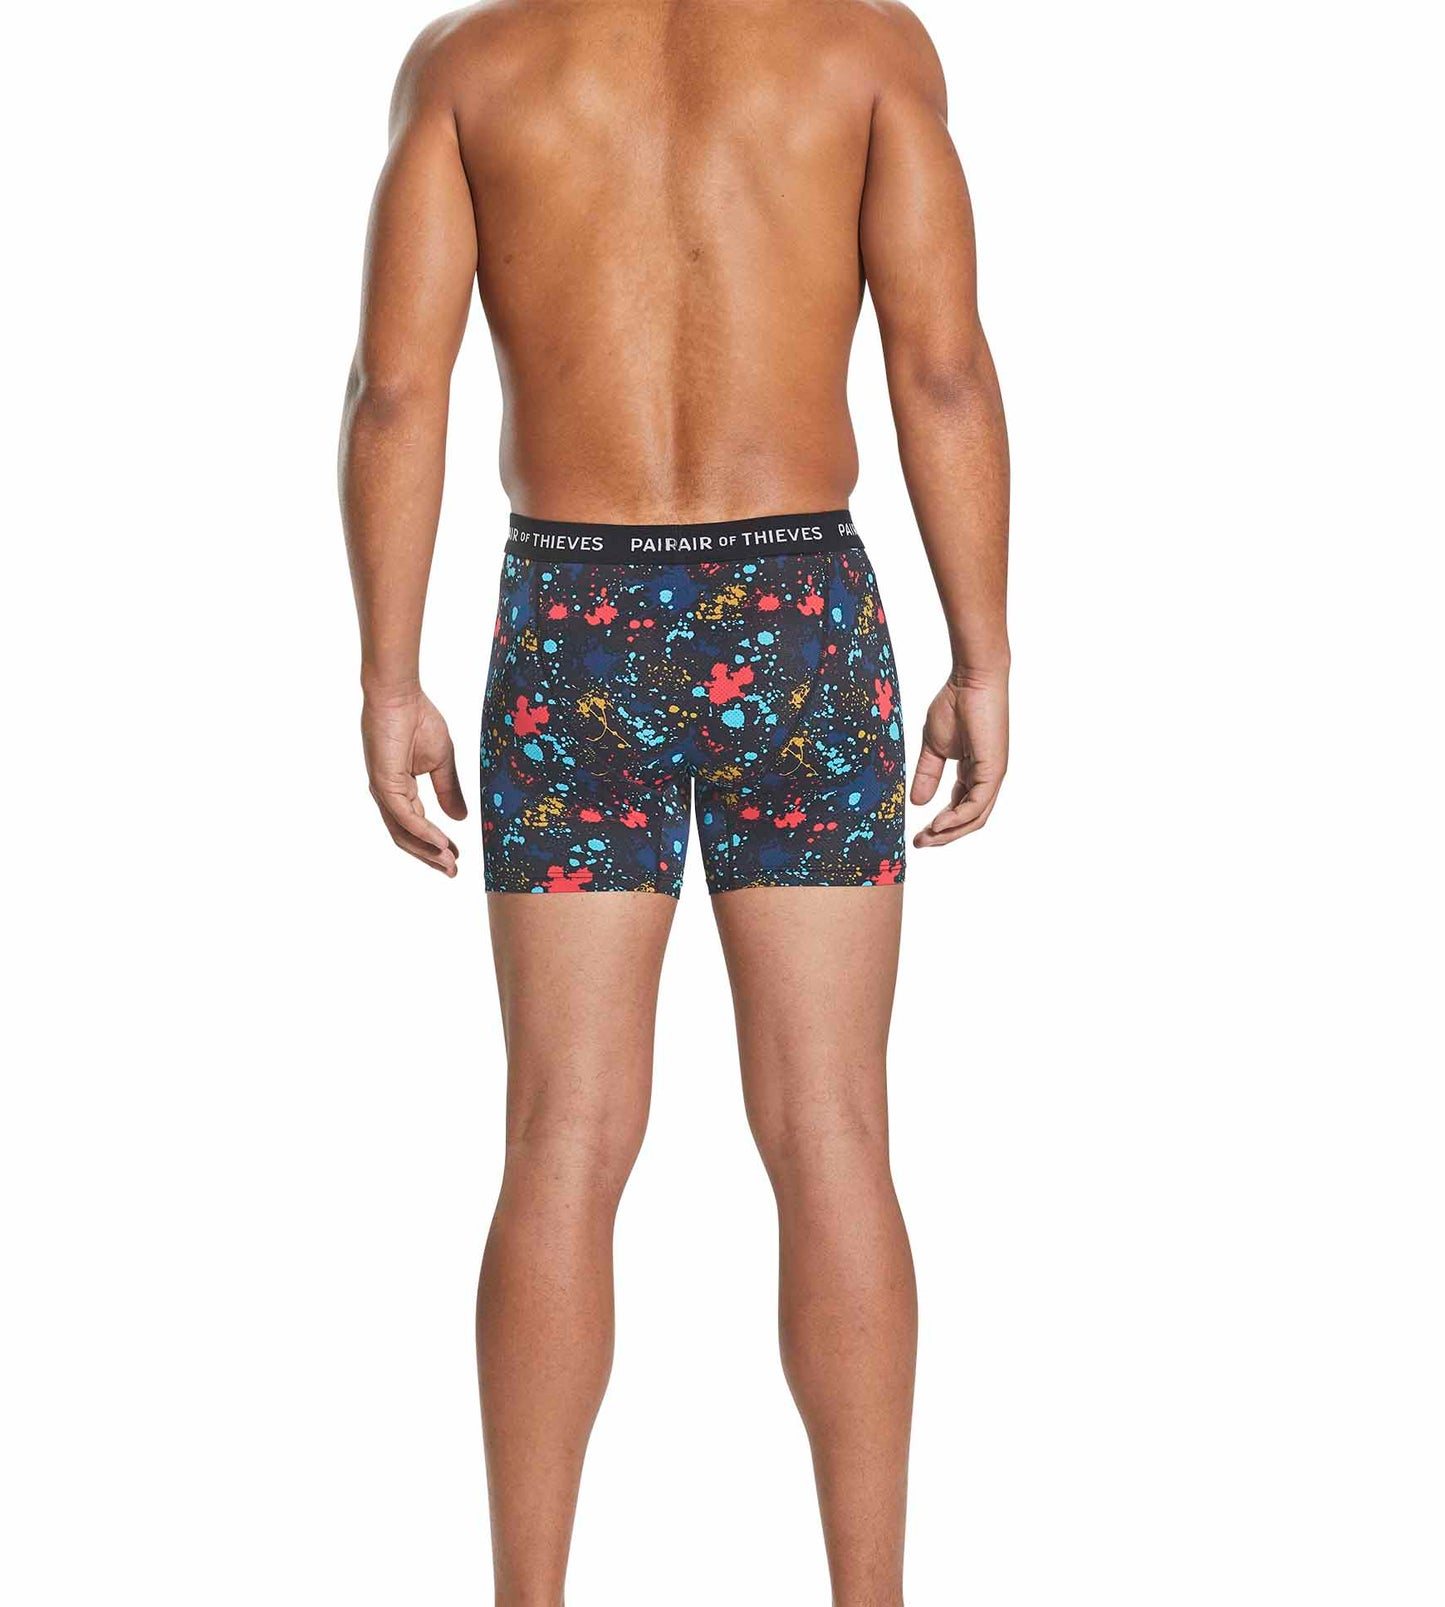 Brian Boxer Brief // Pack of 2 // Multicolor (S) - Warriors